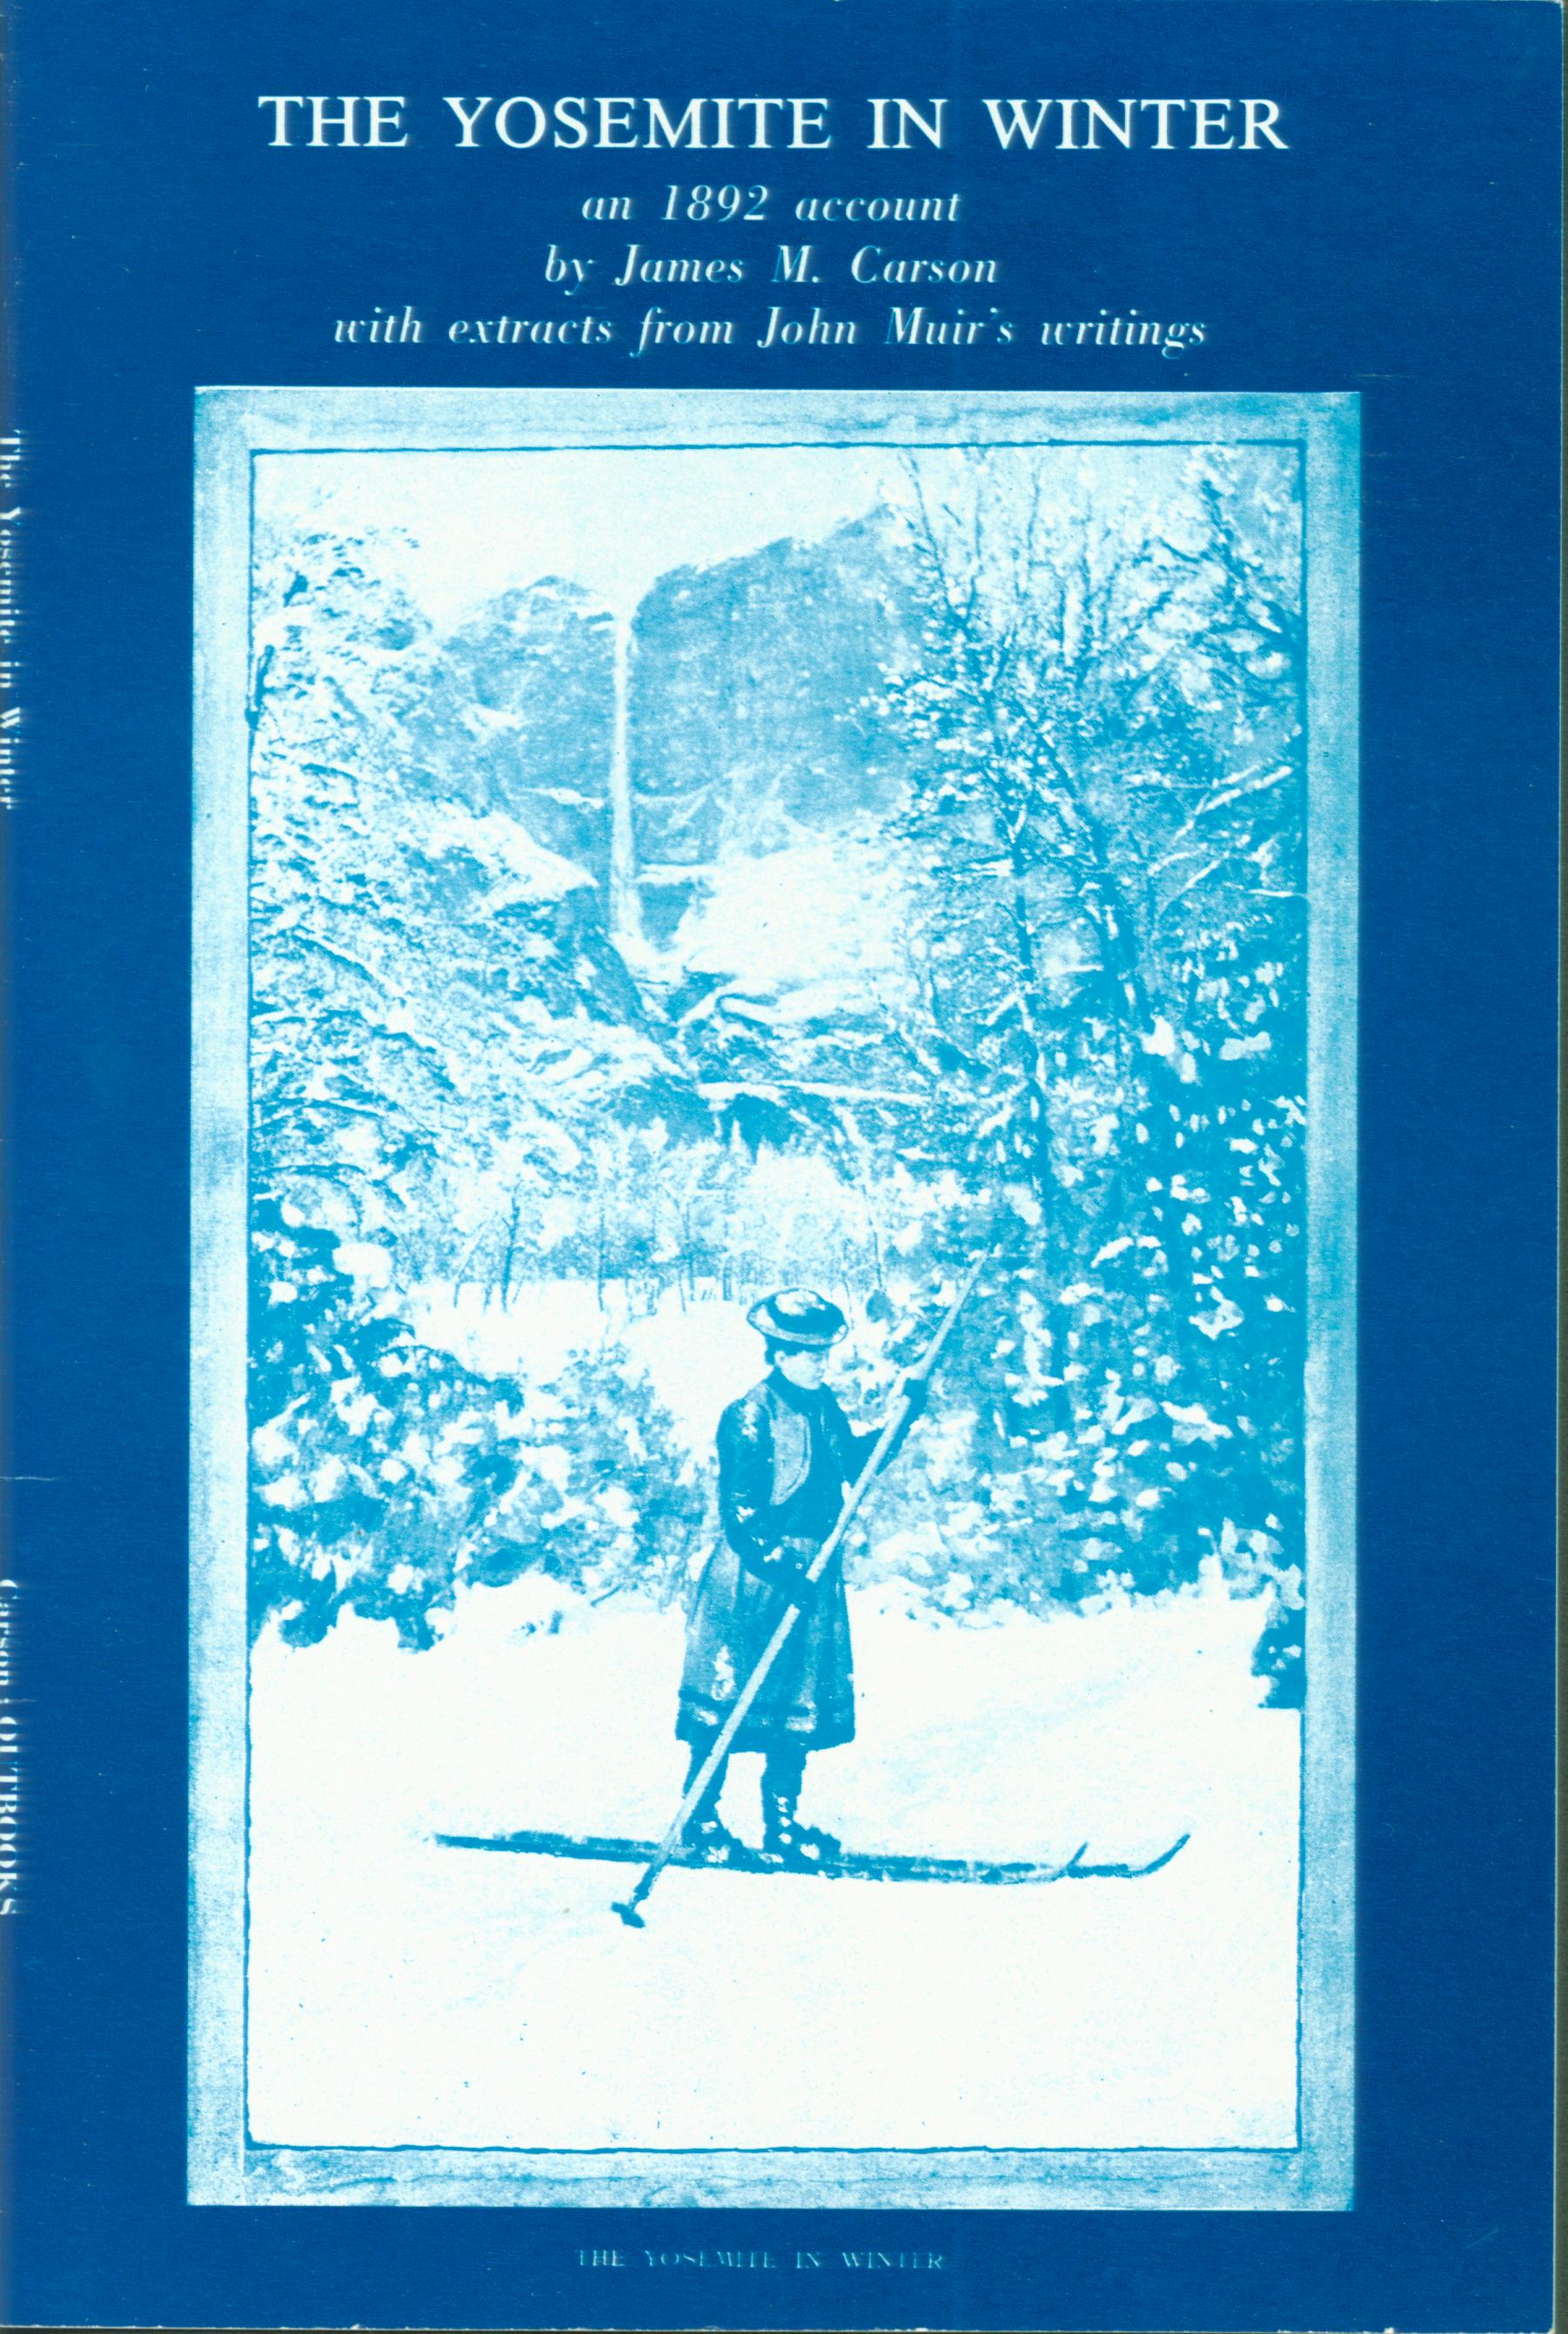 The Yosemite in Winter--an 1892 account. vists0053 front cover mini